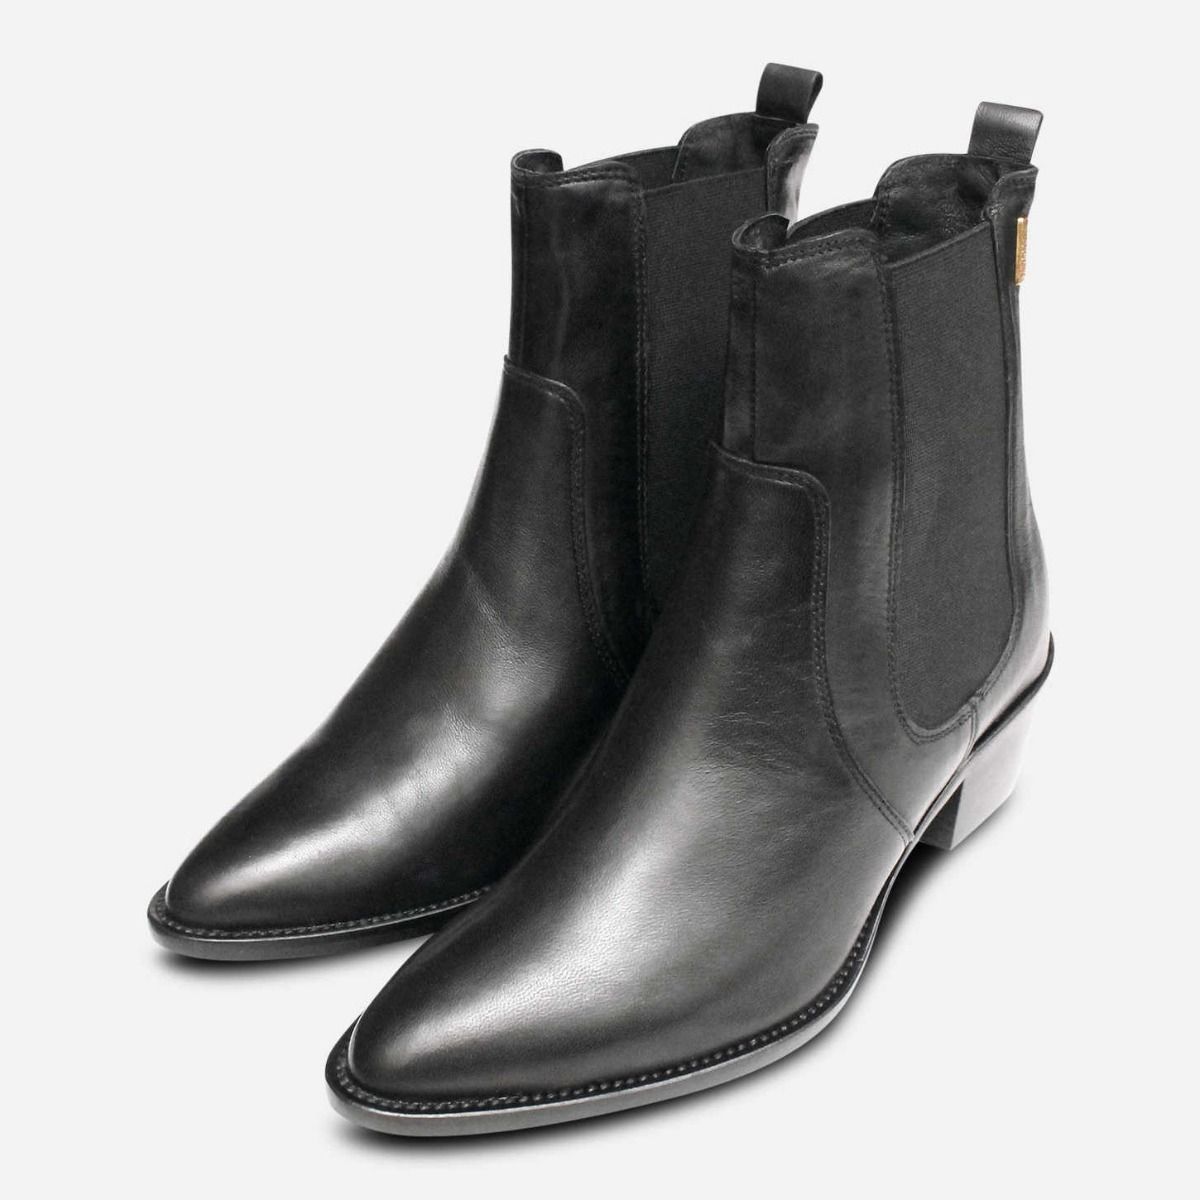 womens black barbour boots